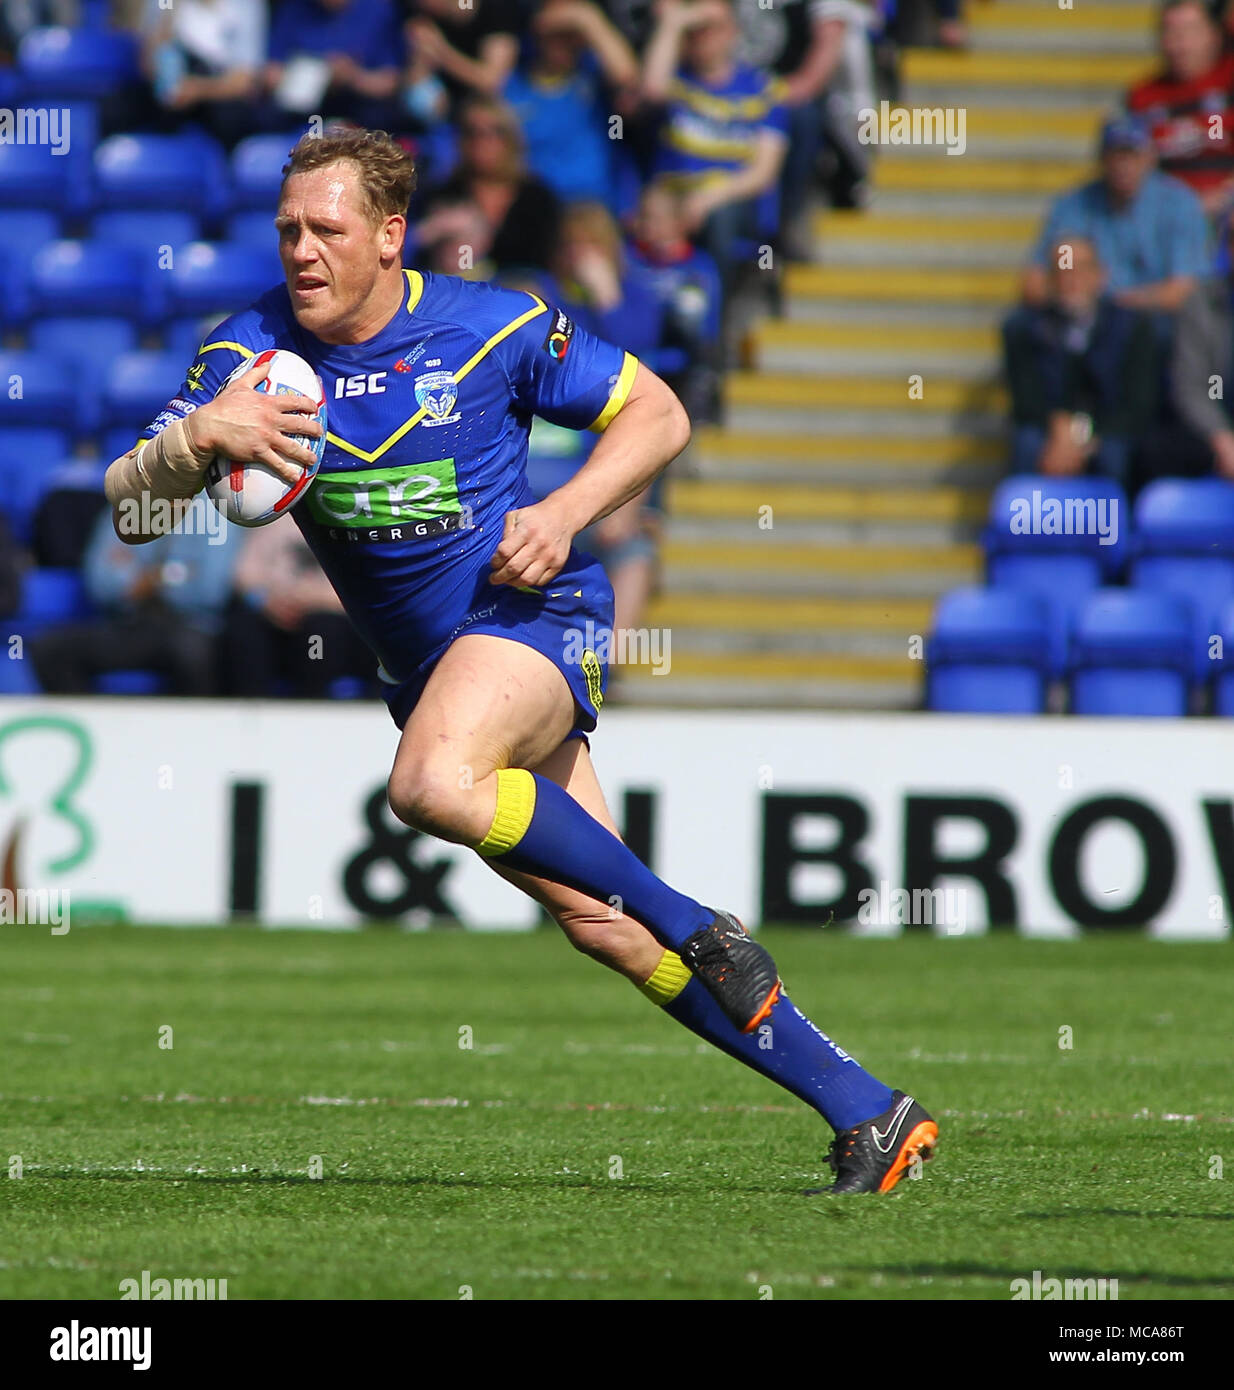 Halliwell Jones Stadium, Warrington, Cheshire, 14th April 2018 Betfred Super League Warrington Wolves vs Hull KR Ben Westwood of Warrington Wolves on the attack Credit Touchlinepics/Alamy Live News Stock Photo